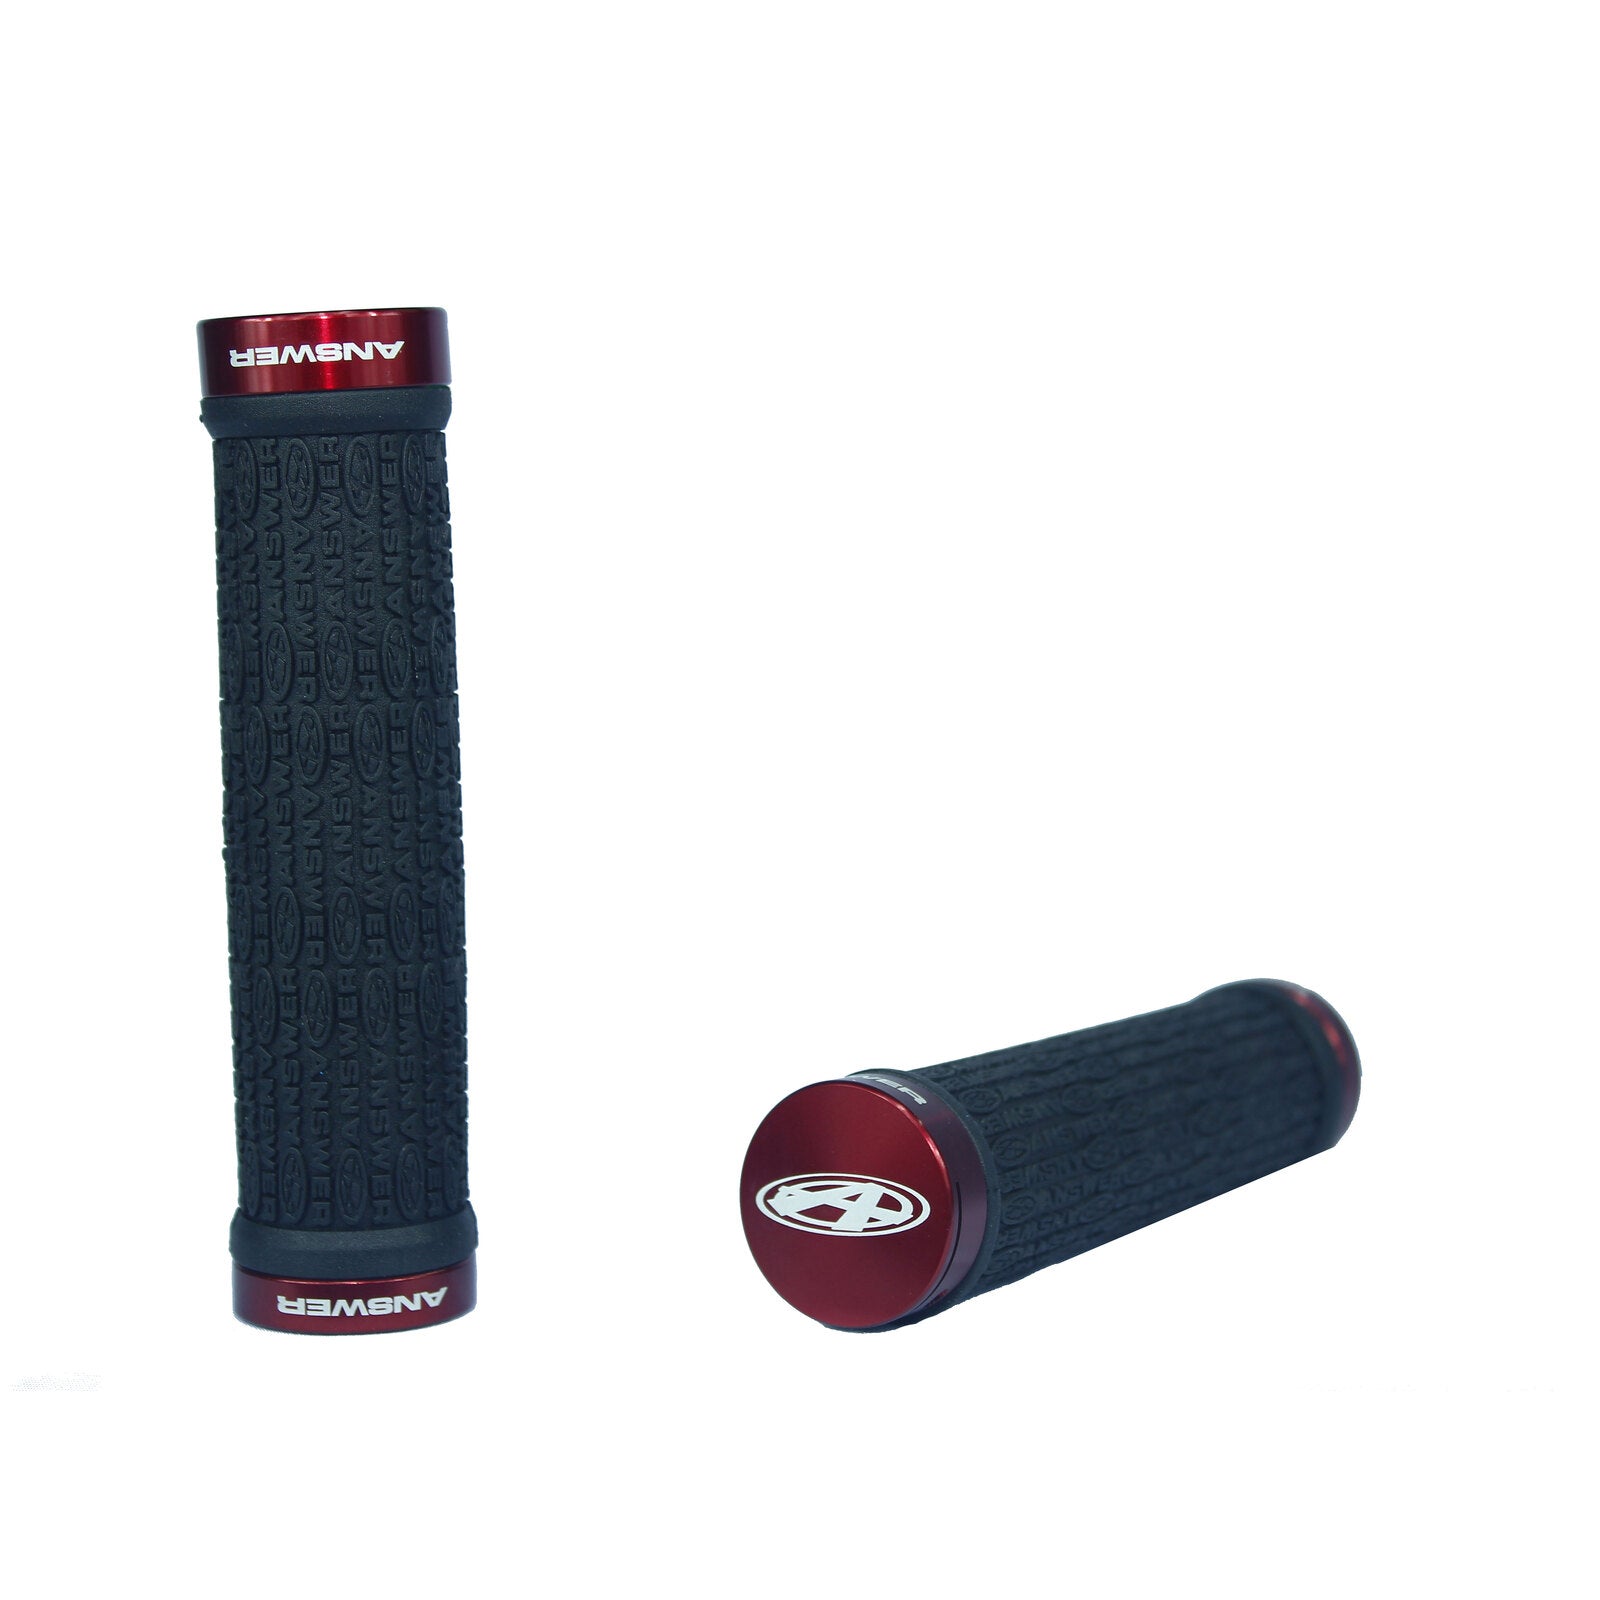 A pair of Answer Pro Lock-On Flangless grips with black and red color scheme on a white background.